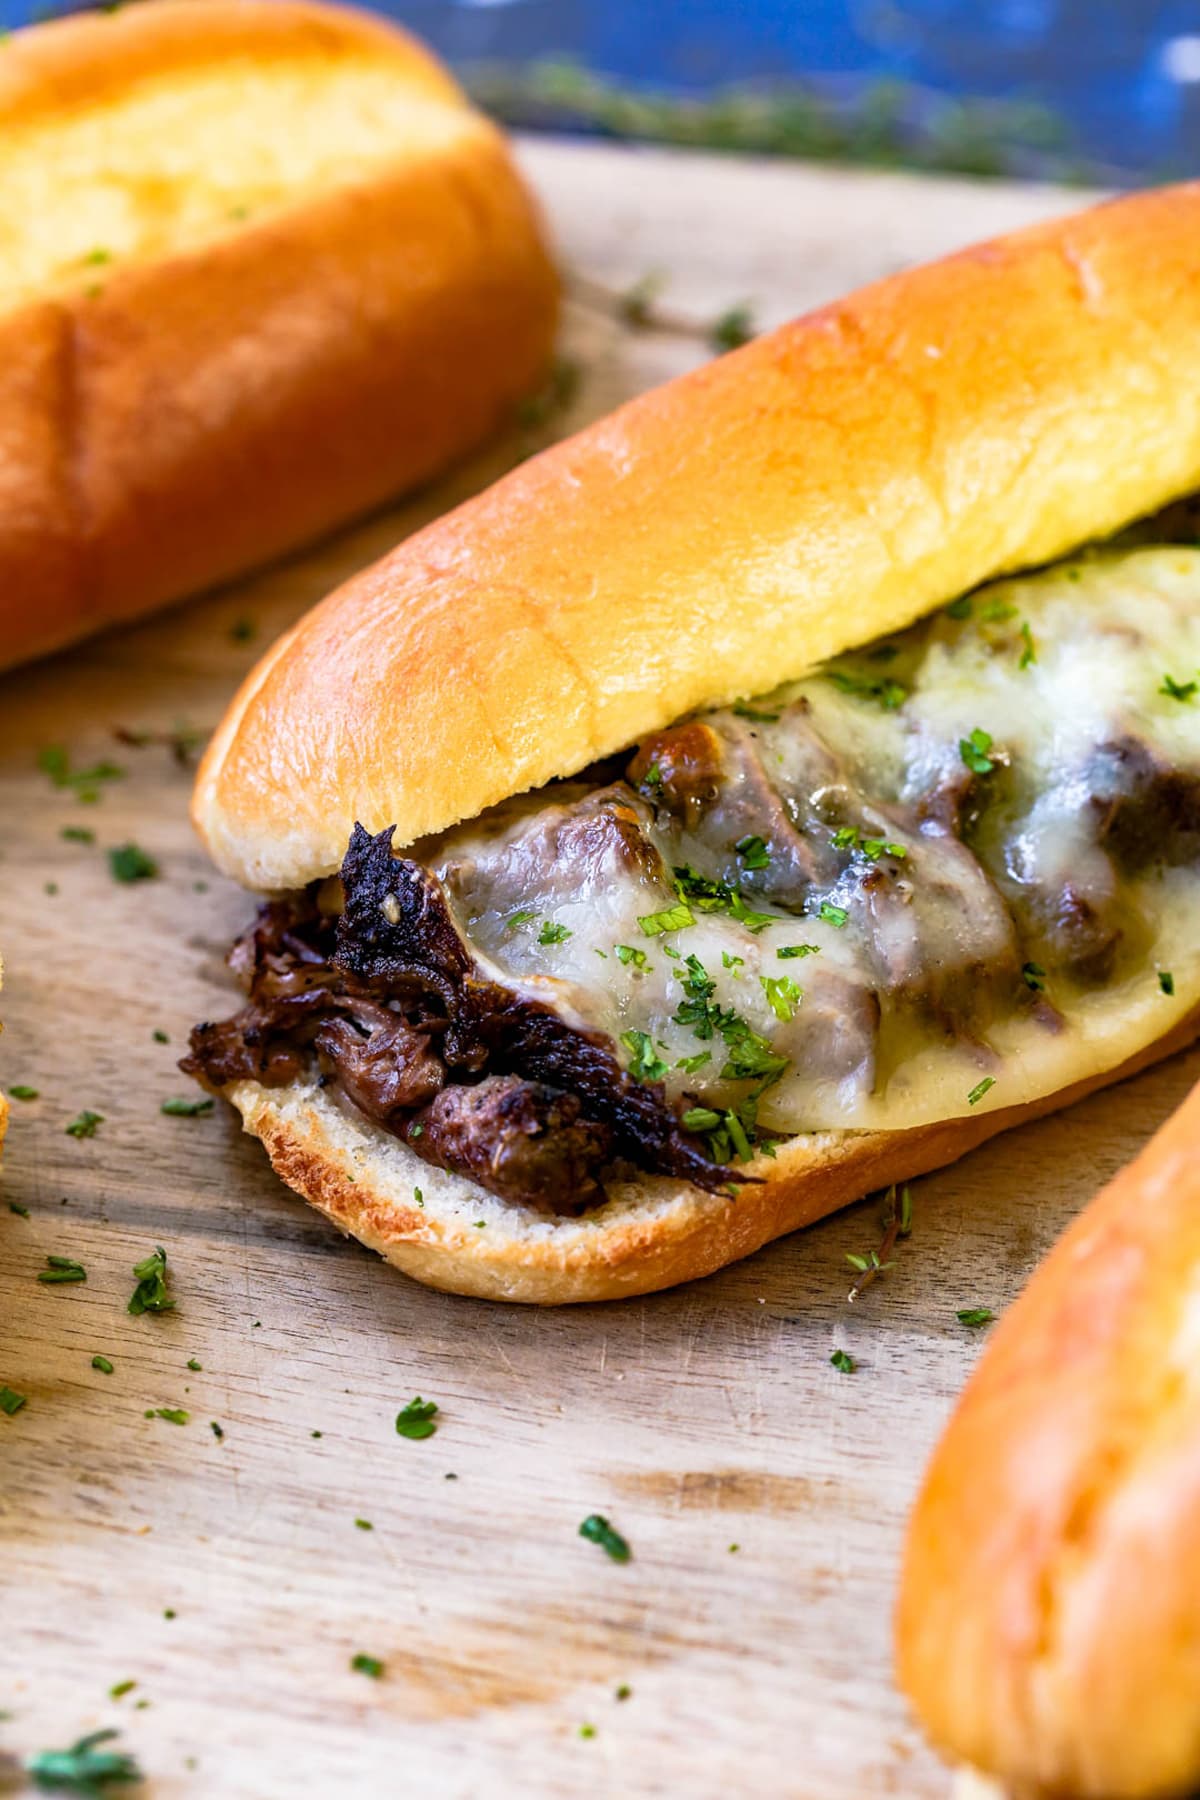 A french dip sandwich with melted cheese